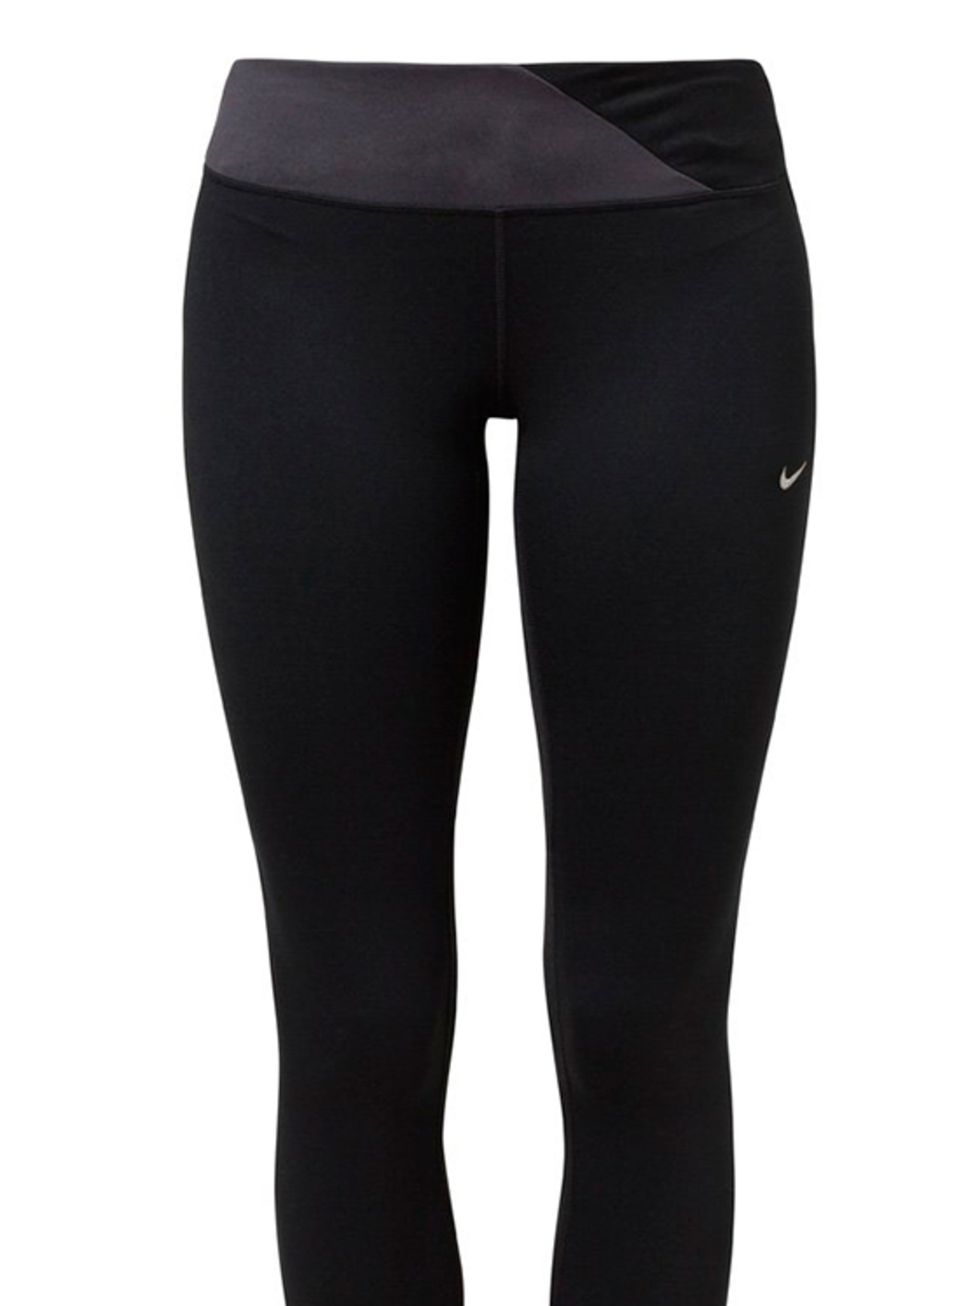 <p>Kirsty Dale, Executive Fashion and Beauty Director</p>

<p><a href="http://store.nike.com/gb/en_gb/pd/epic-run-running-tights/pid-754349/pgid-754351" target="_blank">Nike Epic Run Leggings</a></p>

<p>'I've tried a few different pairs of running leggin